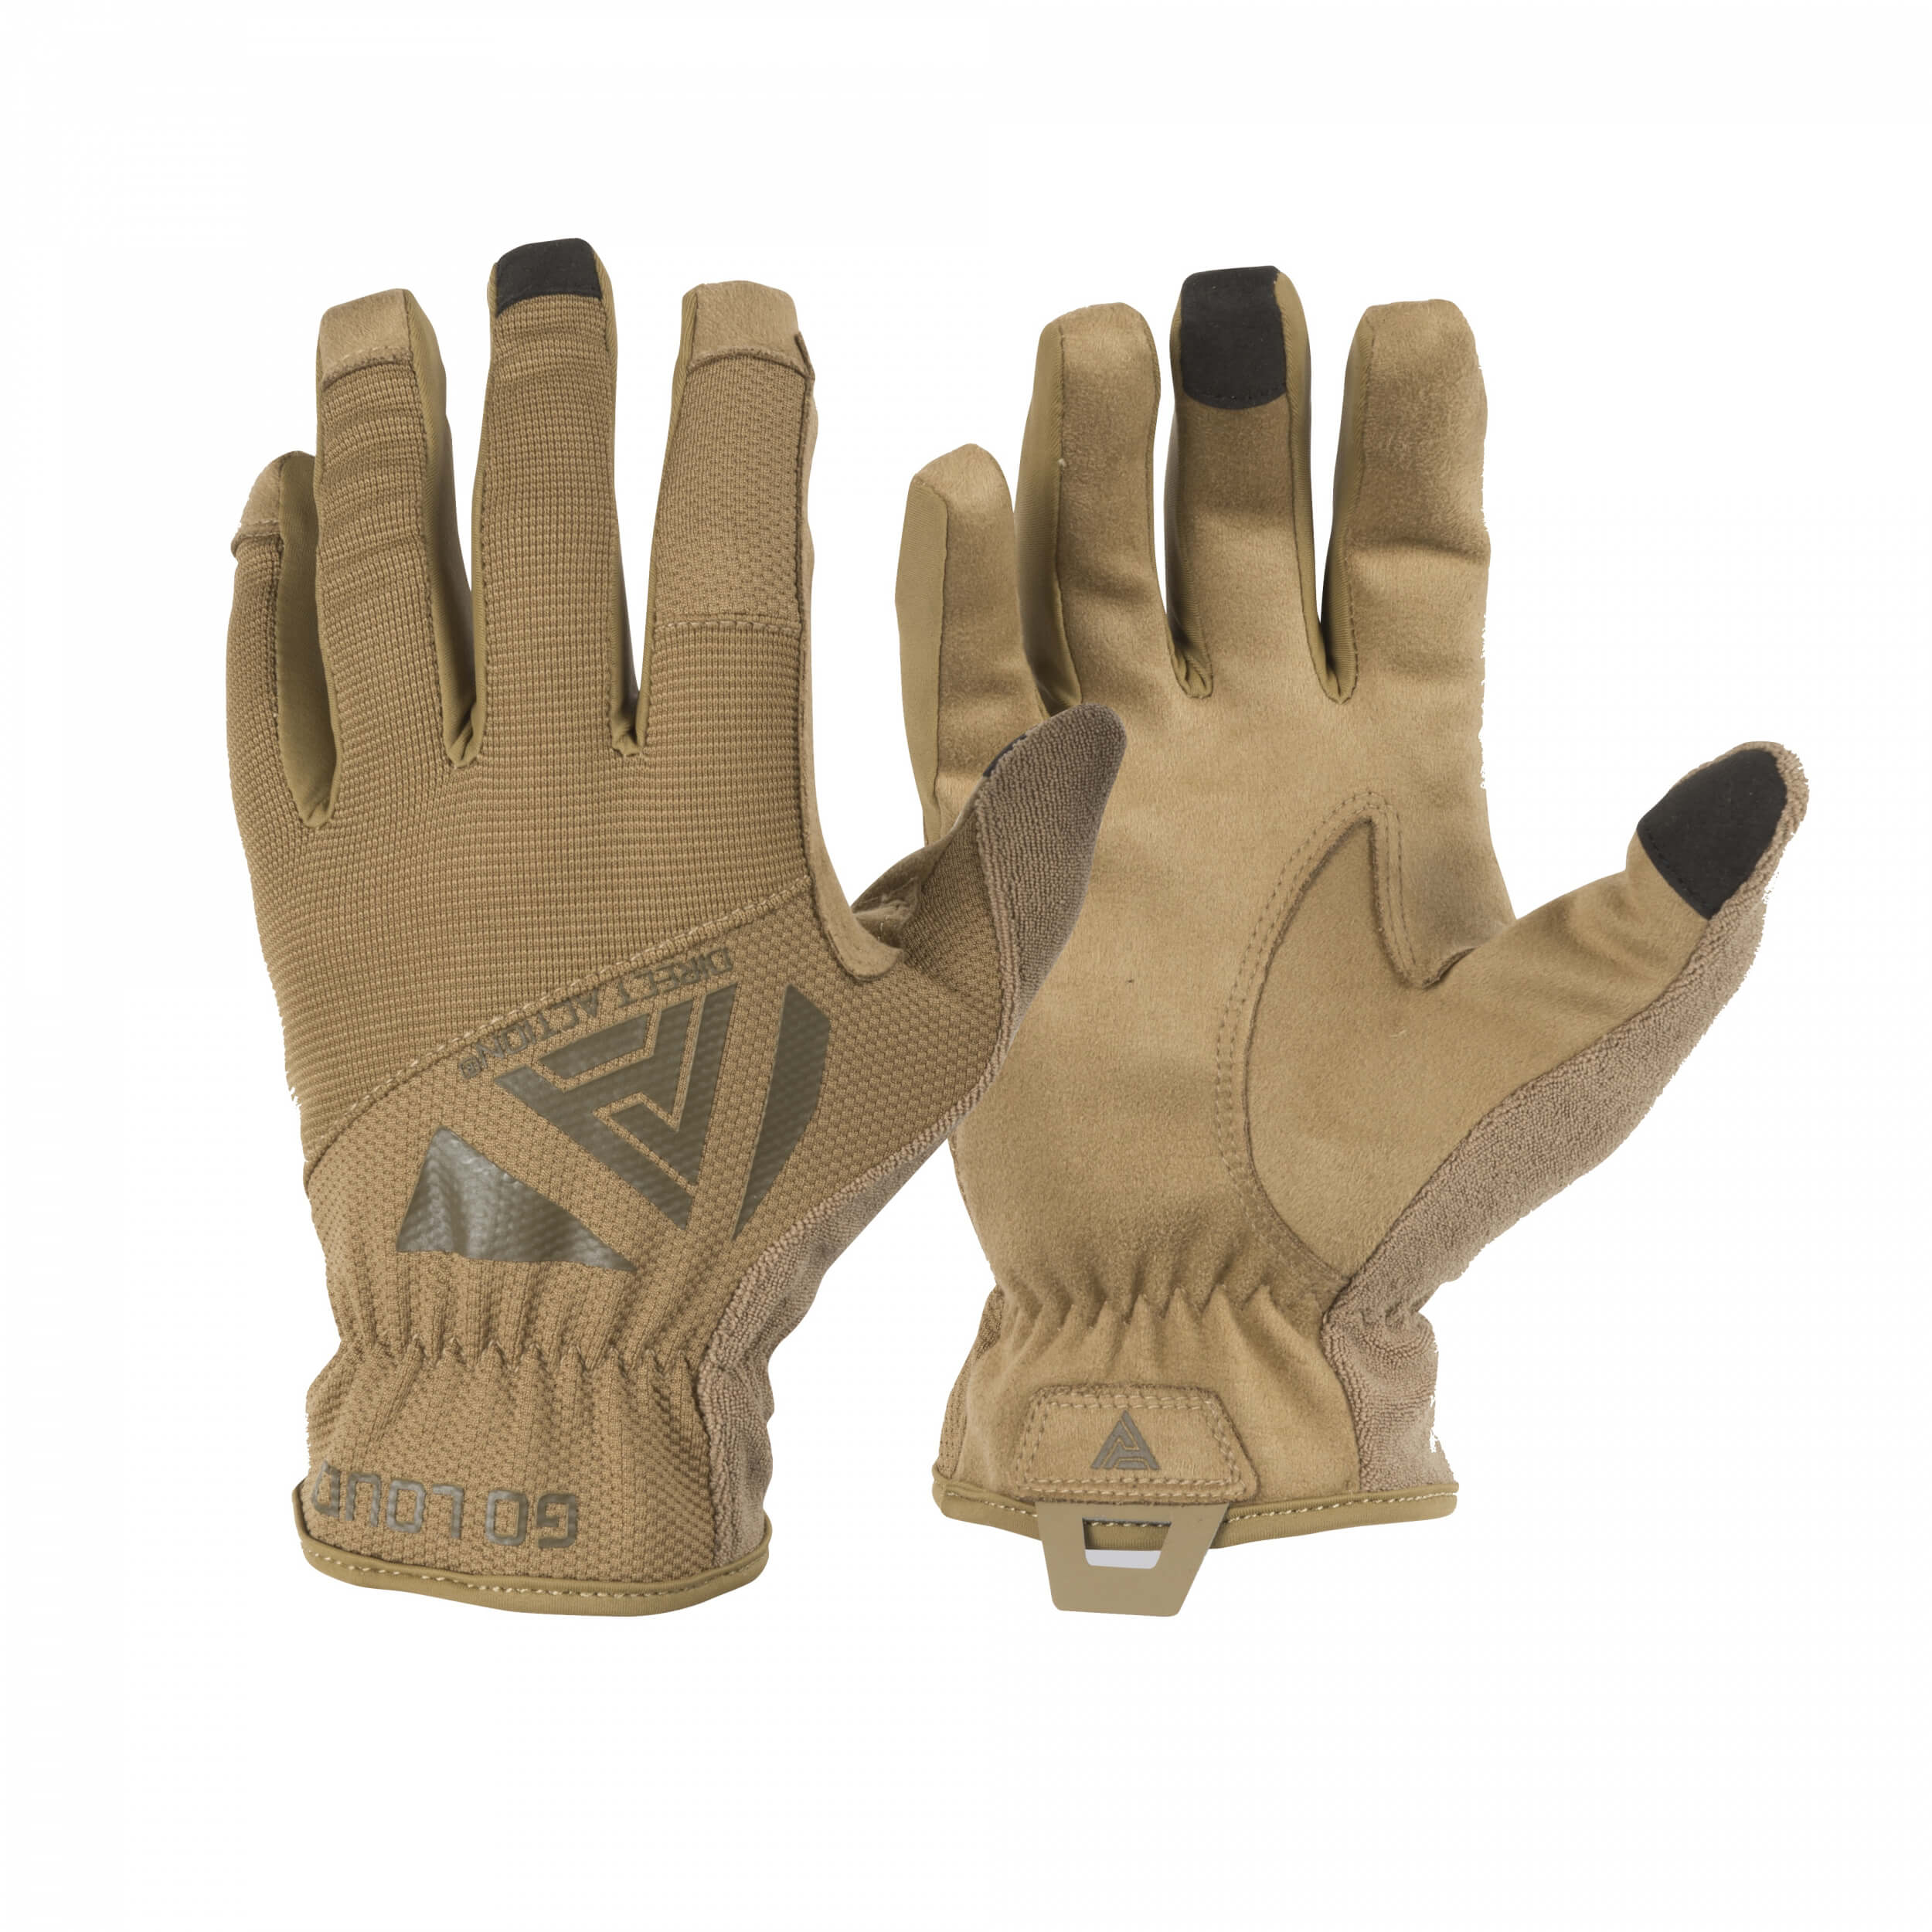 Direct Action Light Gloves Coyote Brown